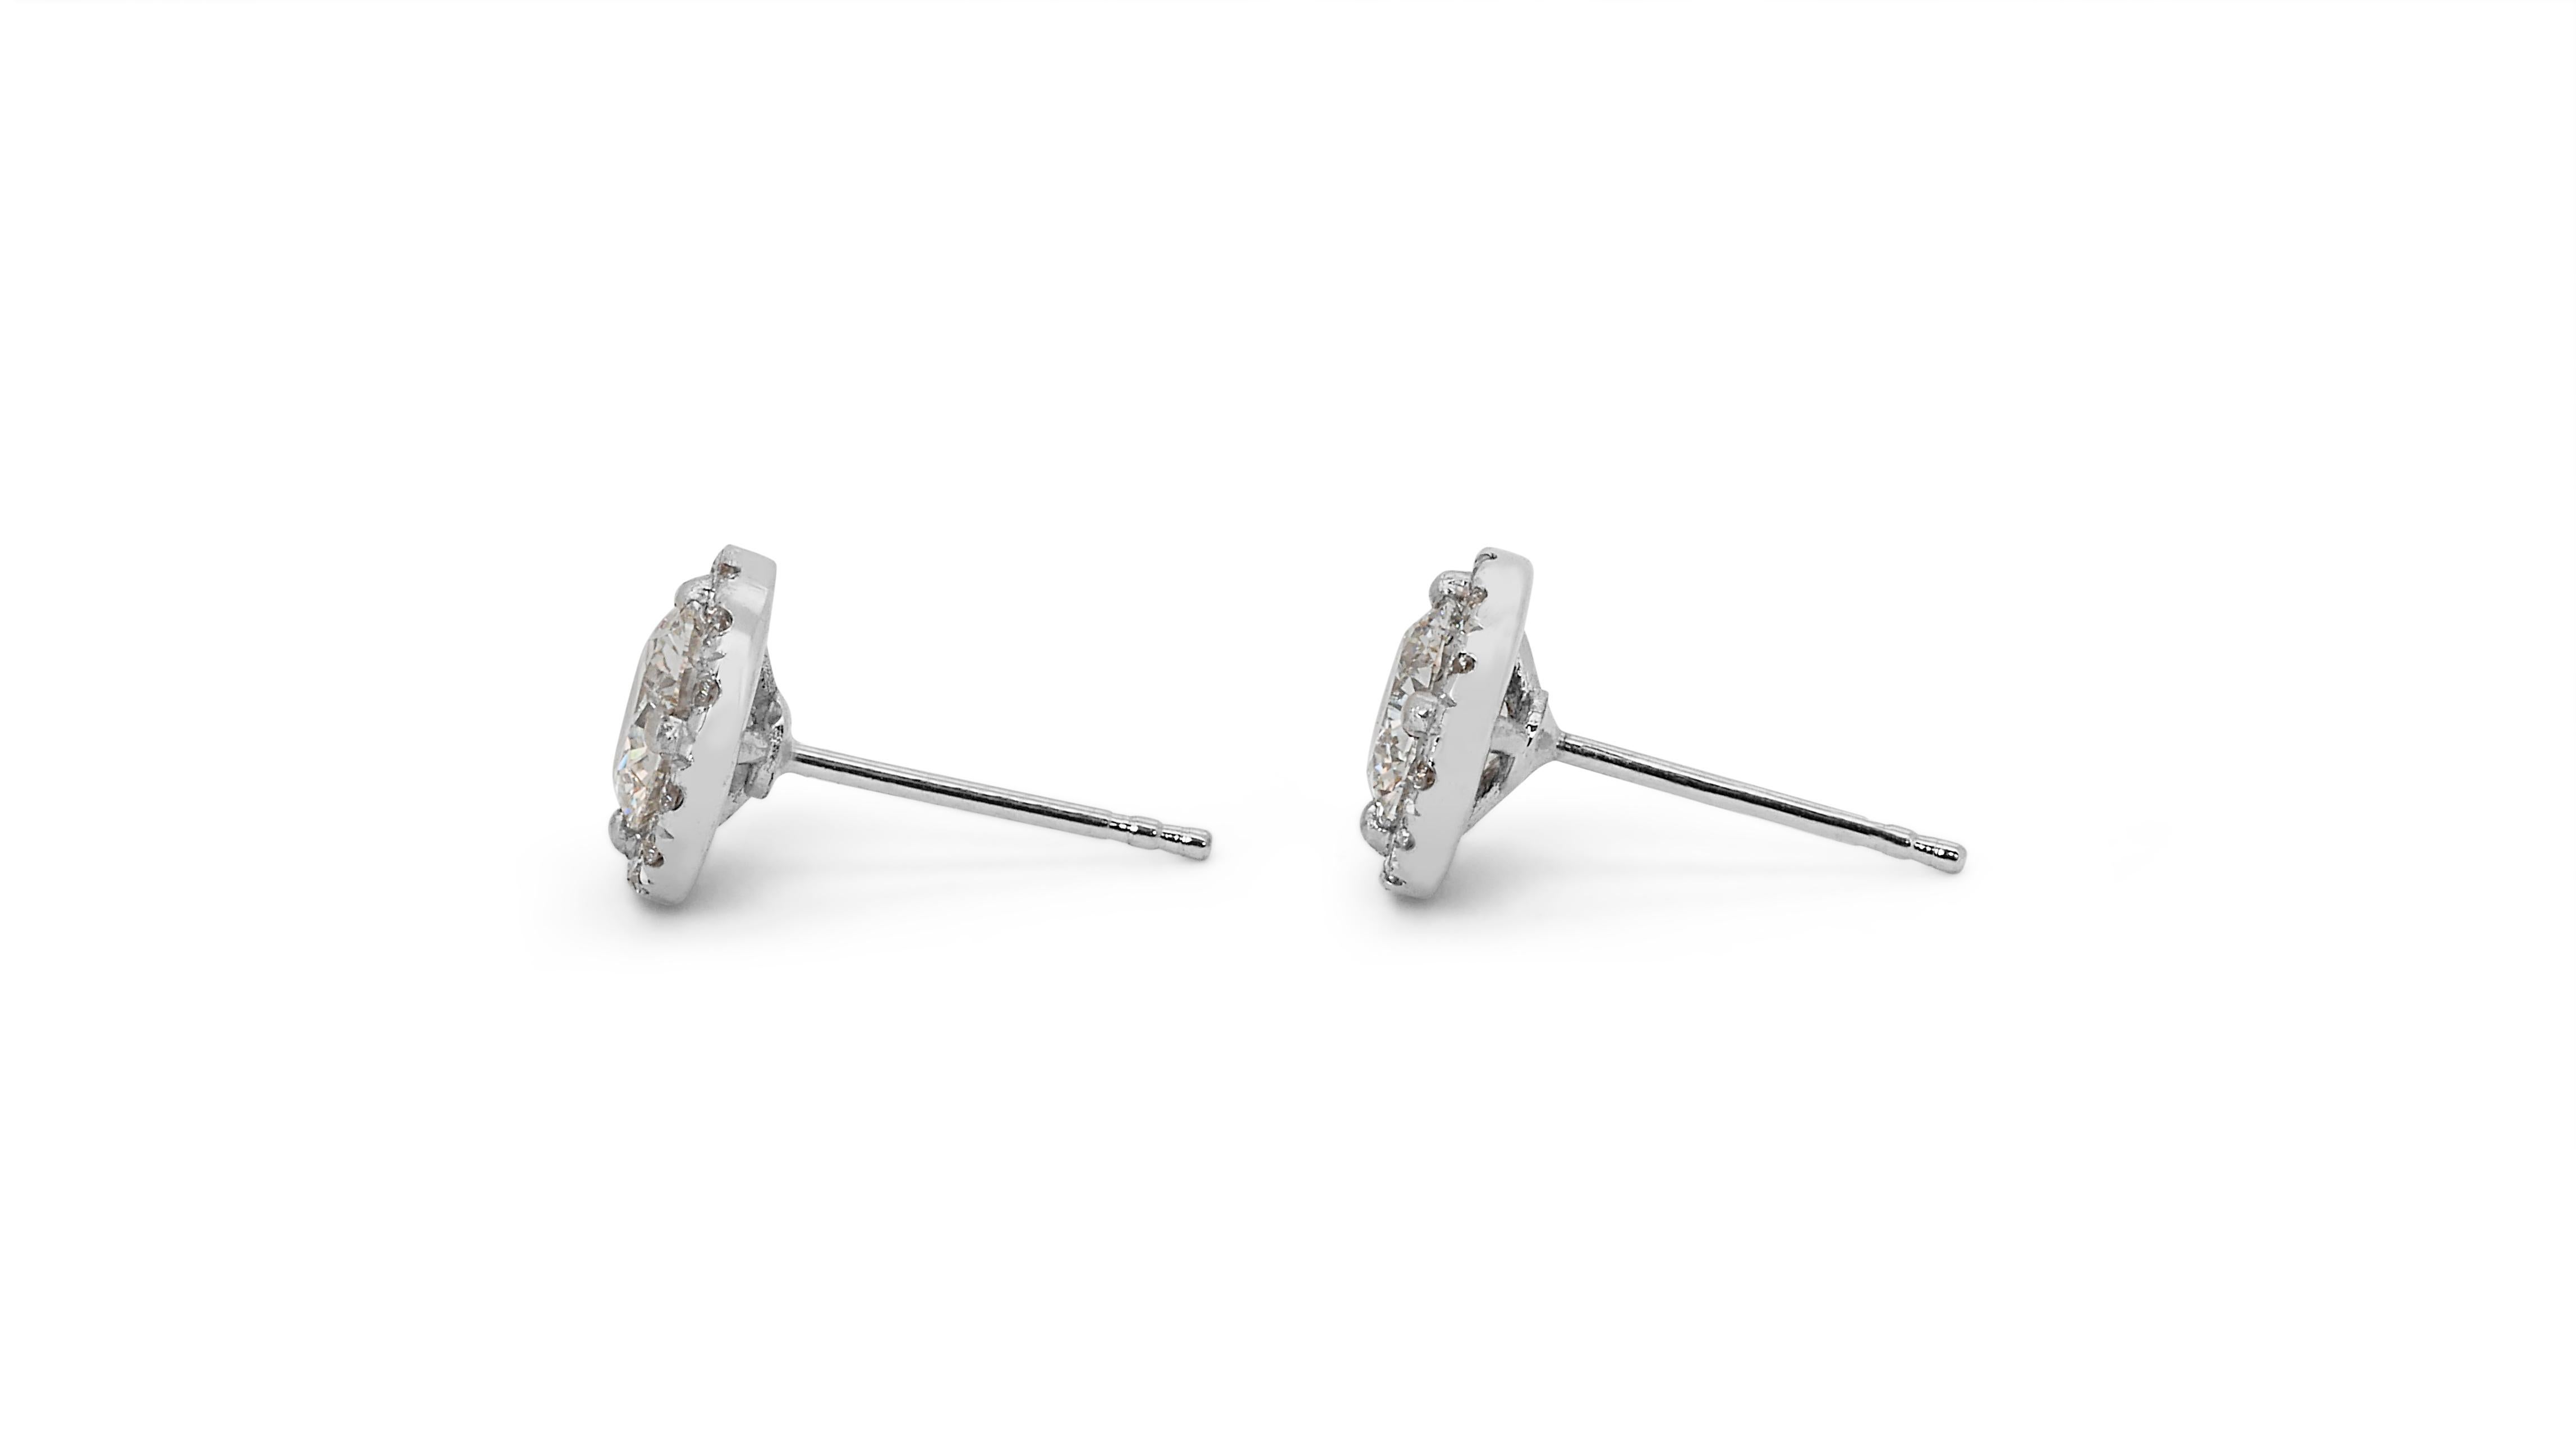 Lustrous 2.57ct Diamond Stud Earrings in 18k White Gold - GIA Certified For Sale 1